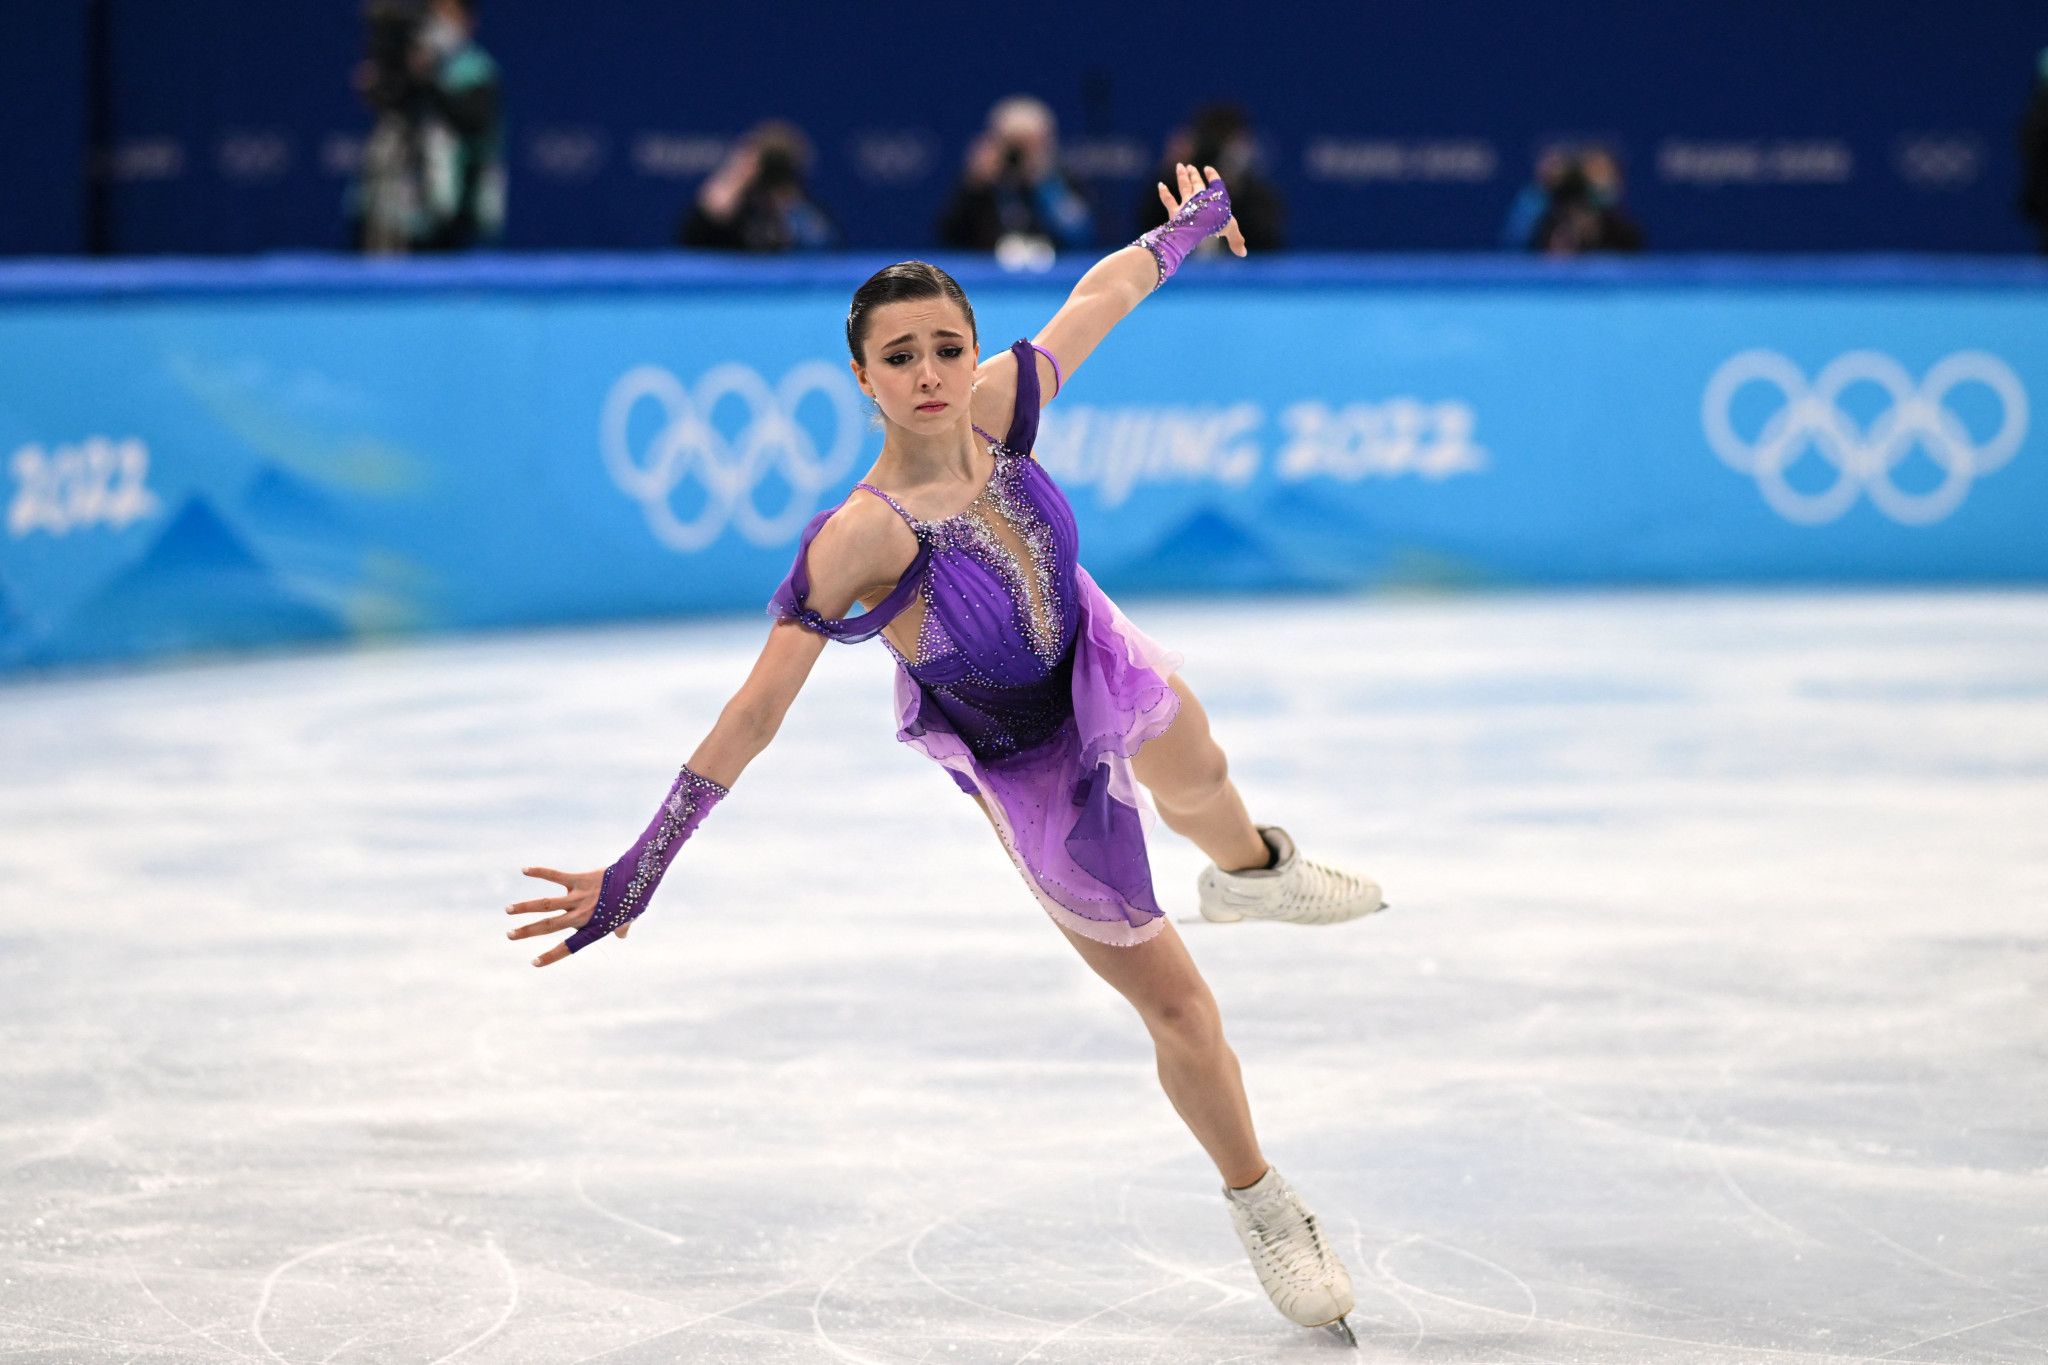 Kamila Valieva of the Russian Olympic Committee recovered from an early stumble on her triple axel to score 82.16 in the short programme of the women's singles figure skating event ©Getty Images